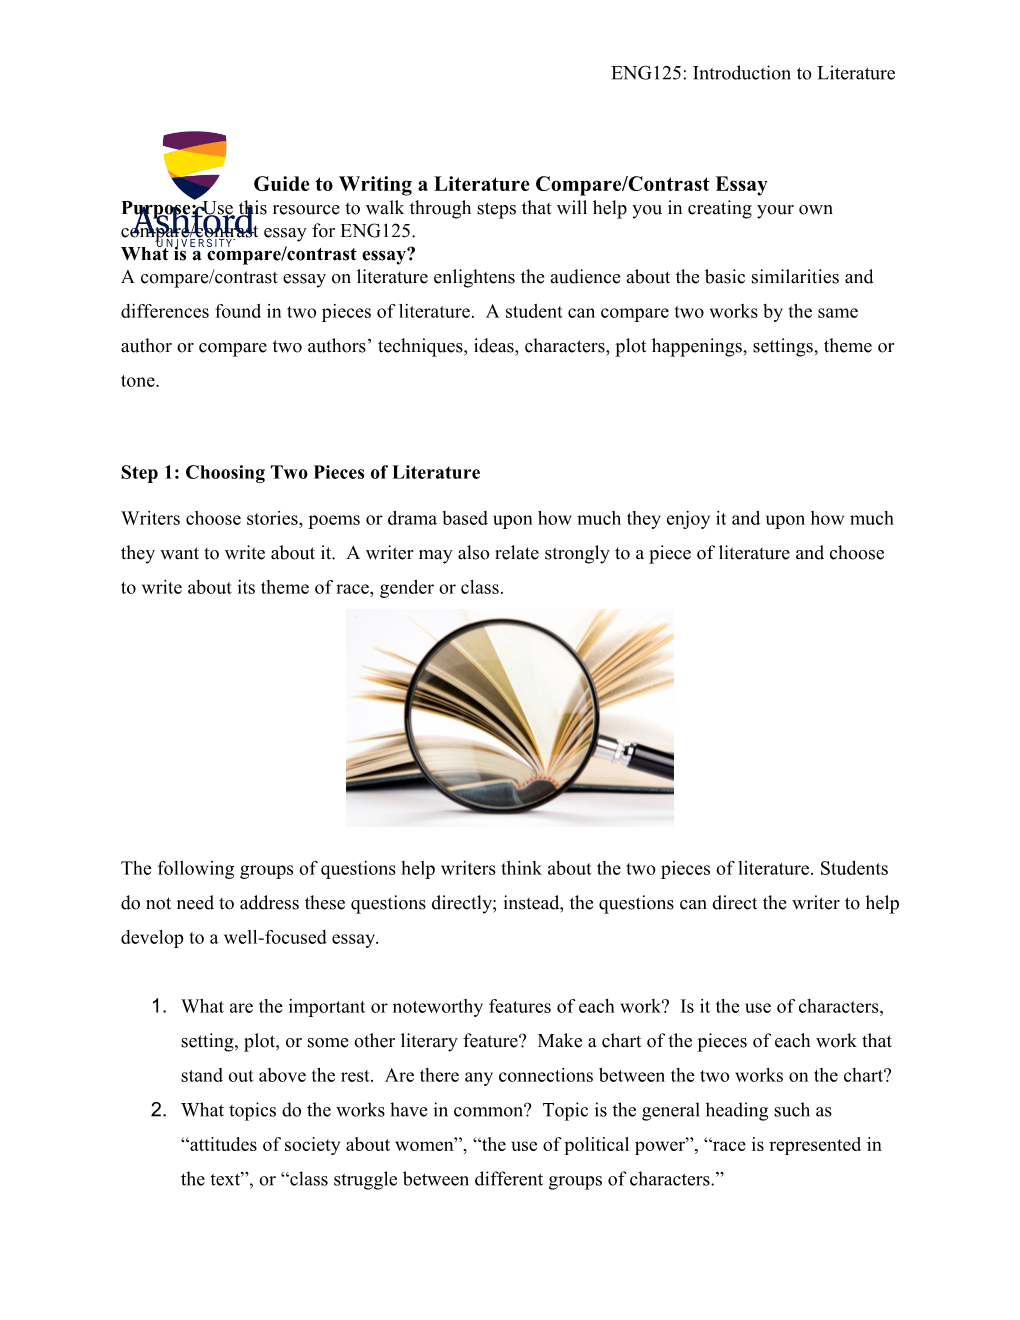 Guide to Writing a Literature Compare/Contrast Essay